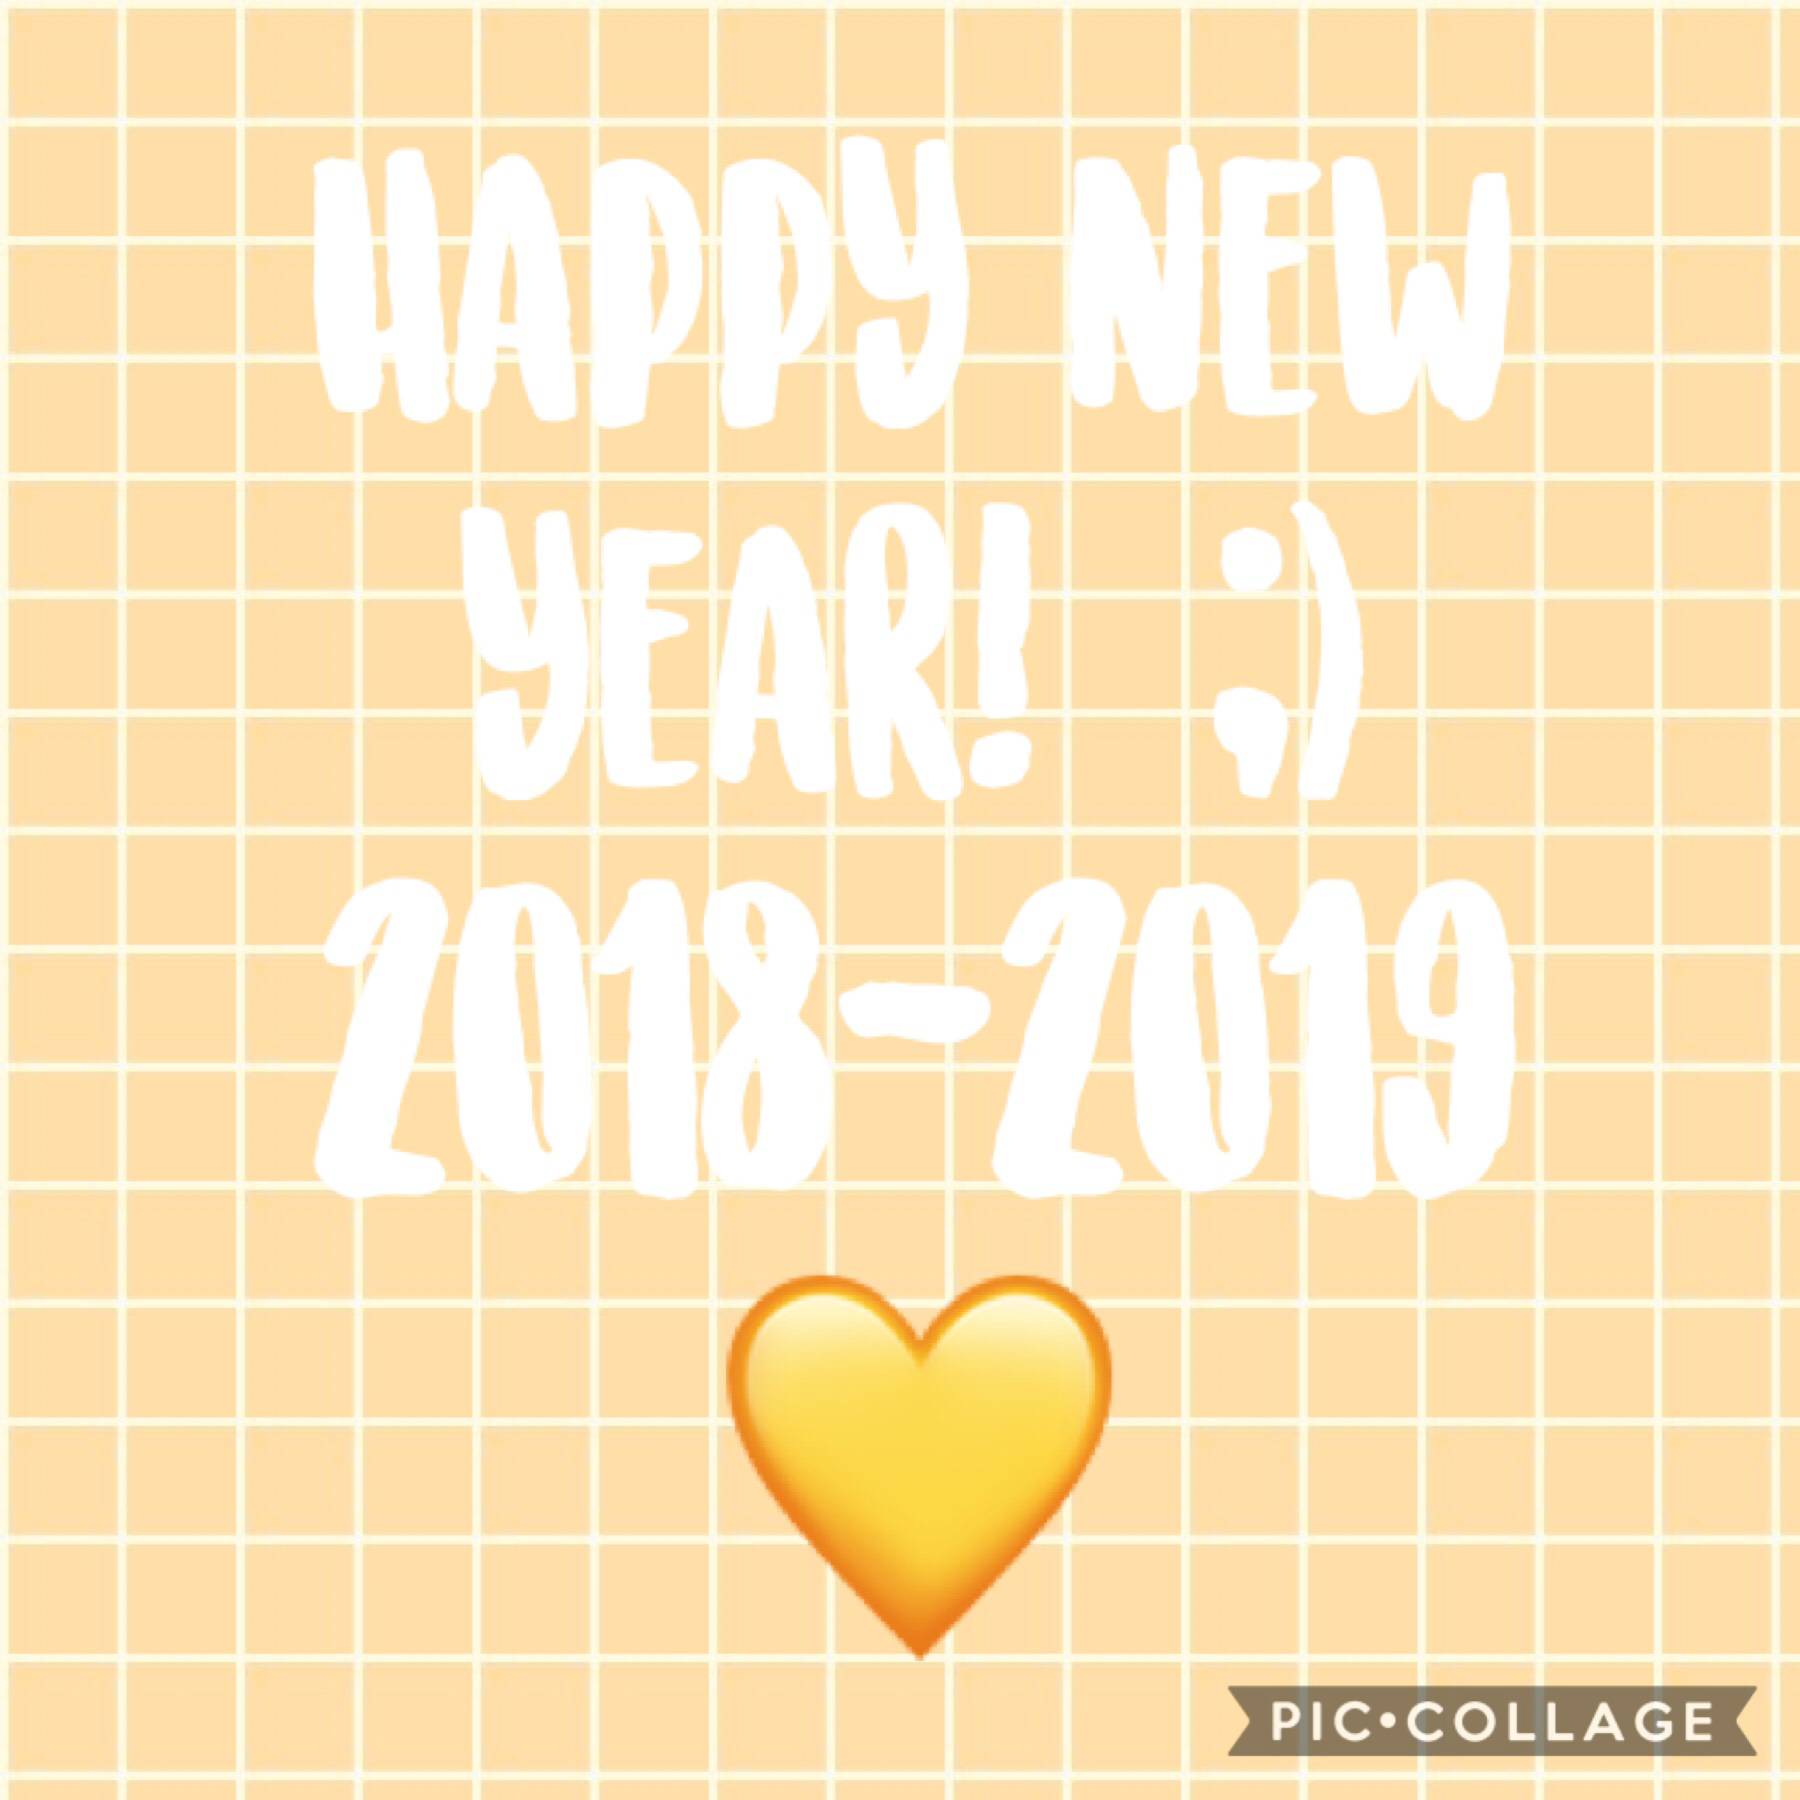 Happy new year!
Simplest one I could make